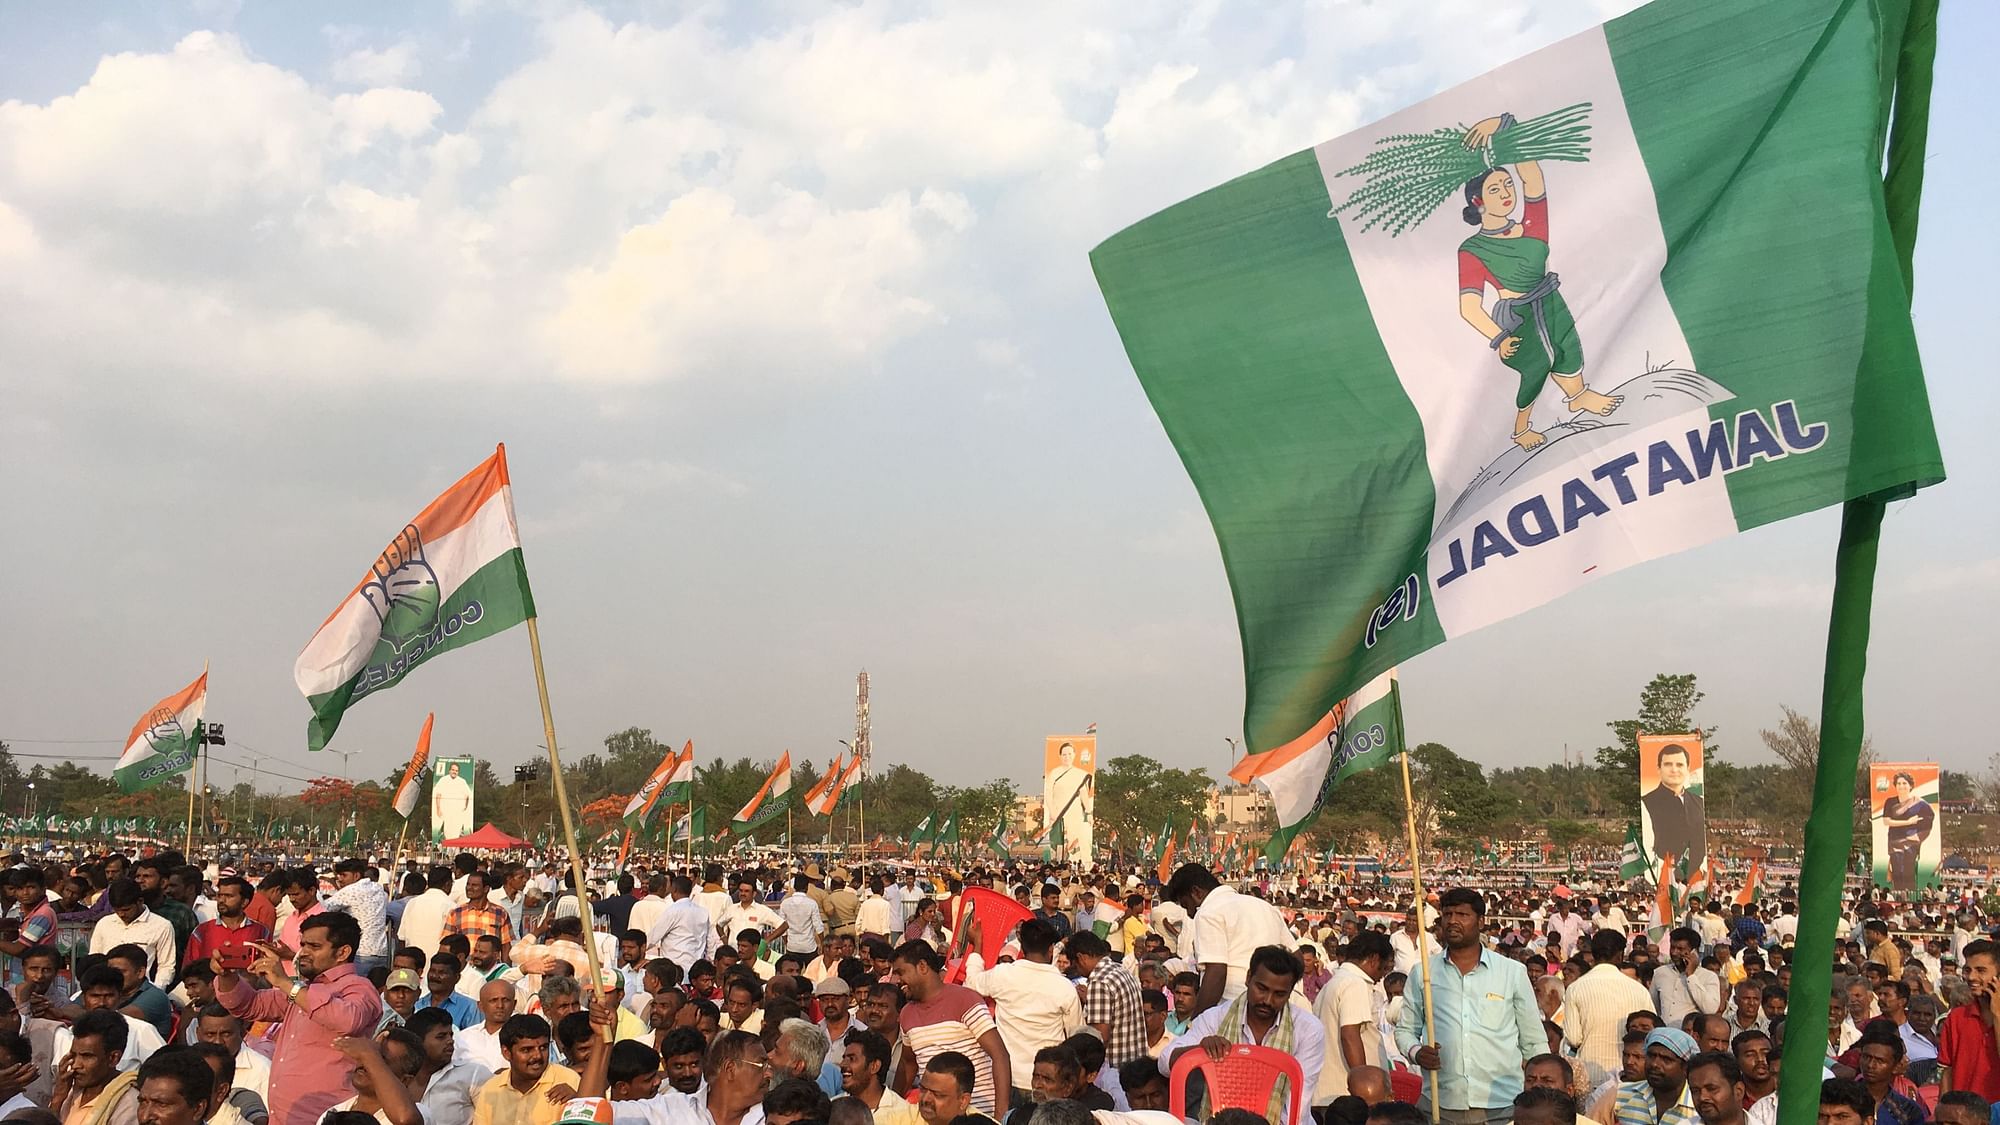 Congress and JD(S) held their first joint rally in Bengaluru on 31 March.